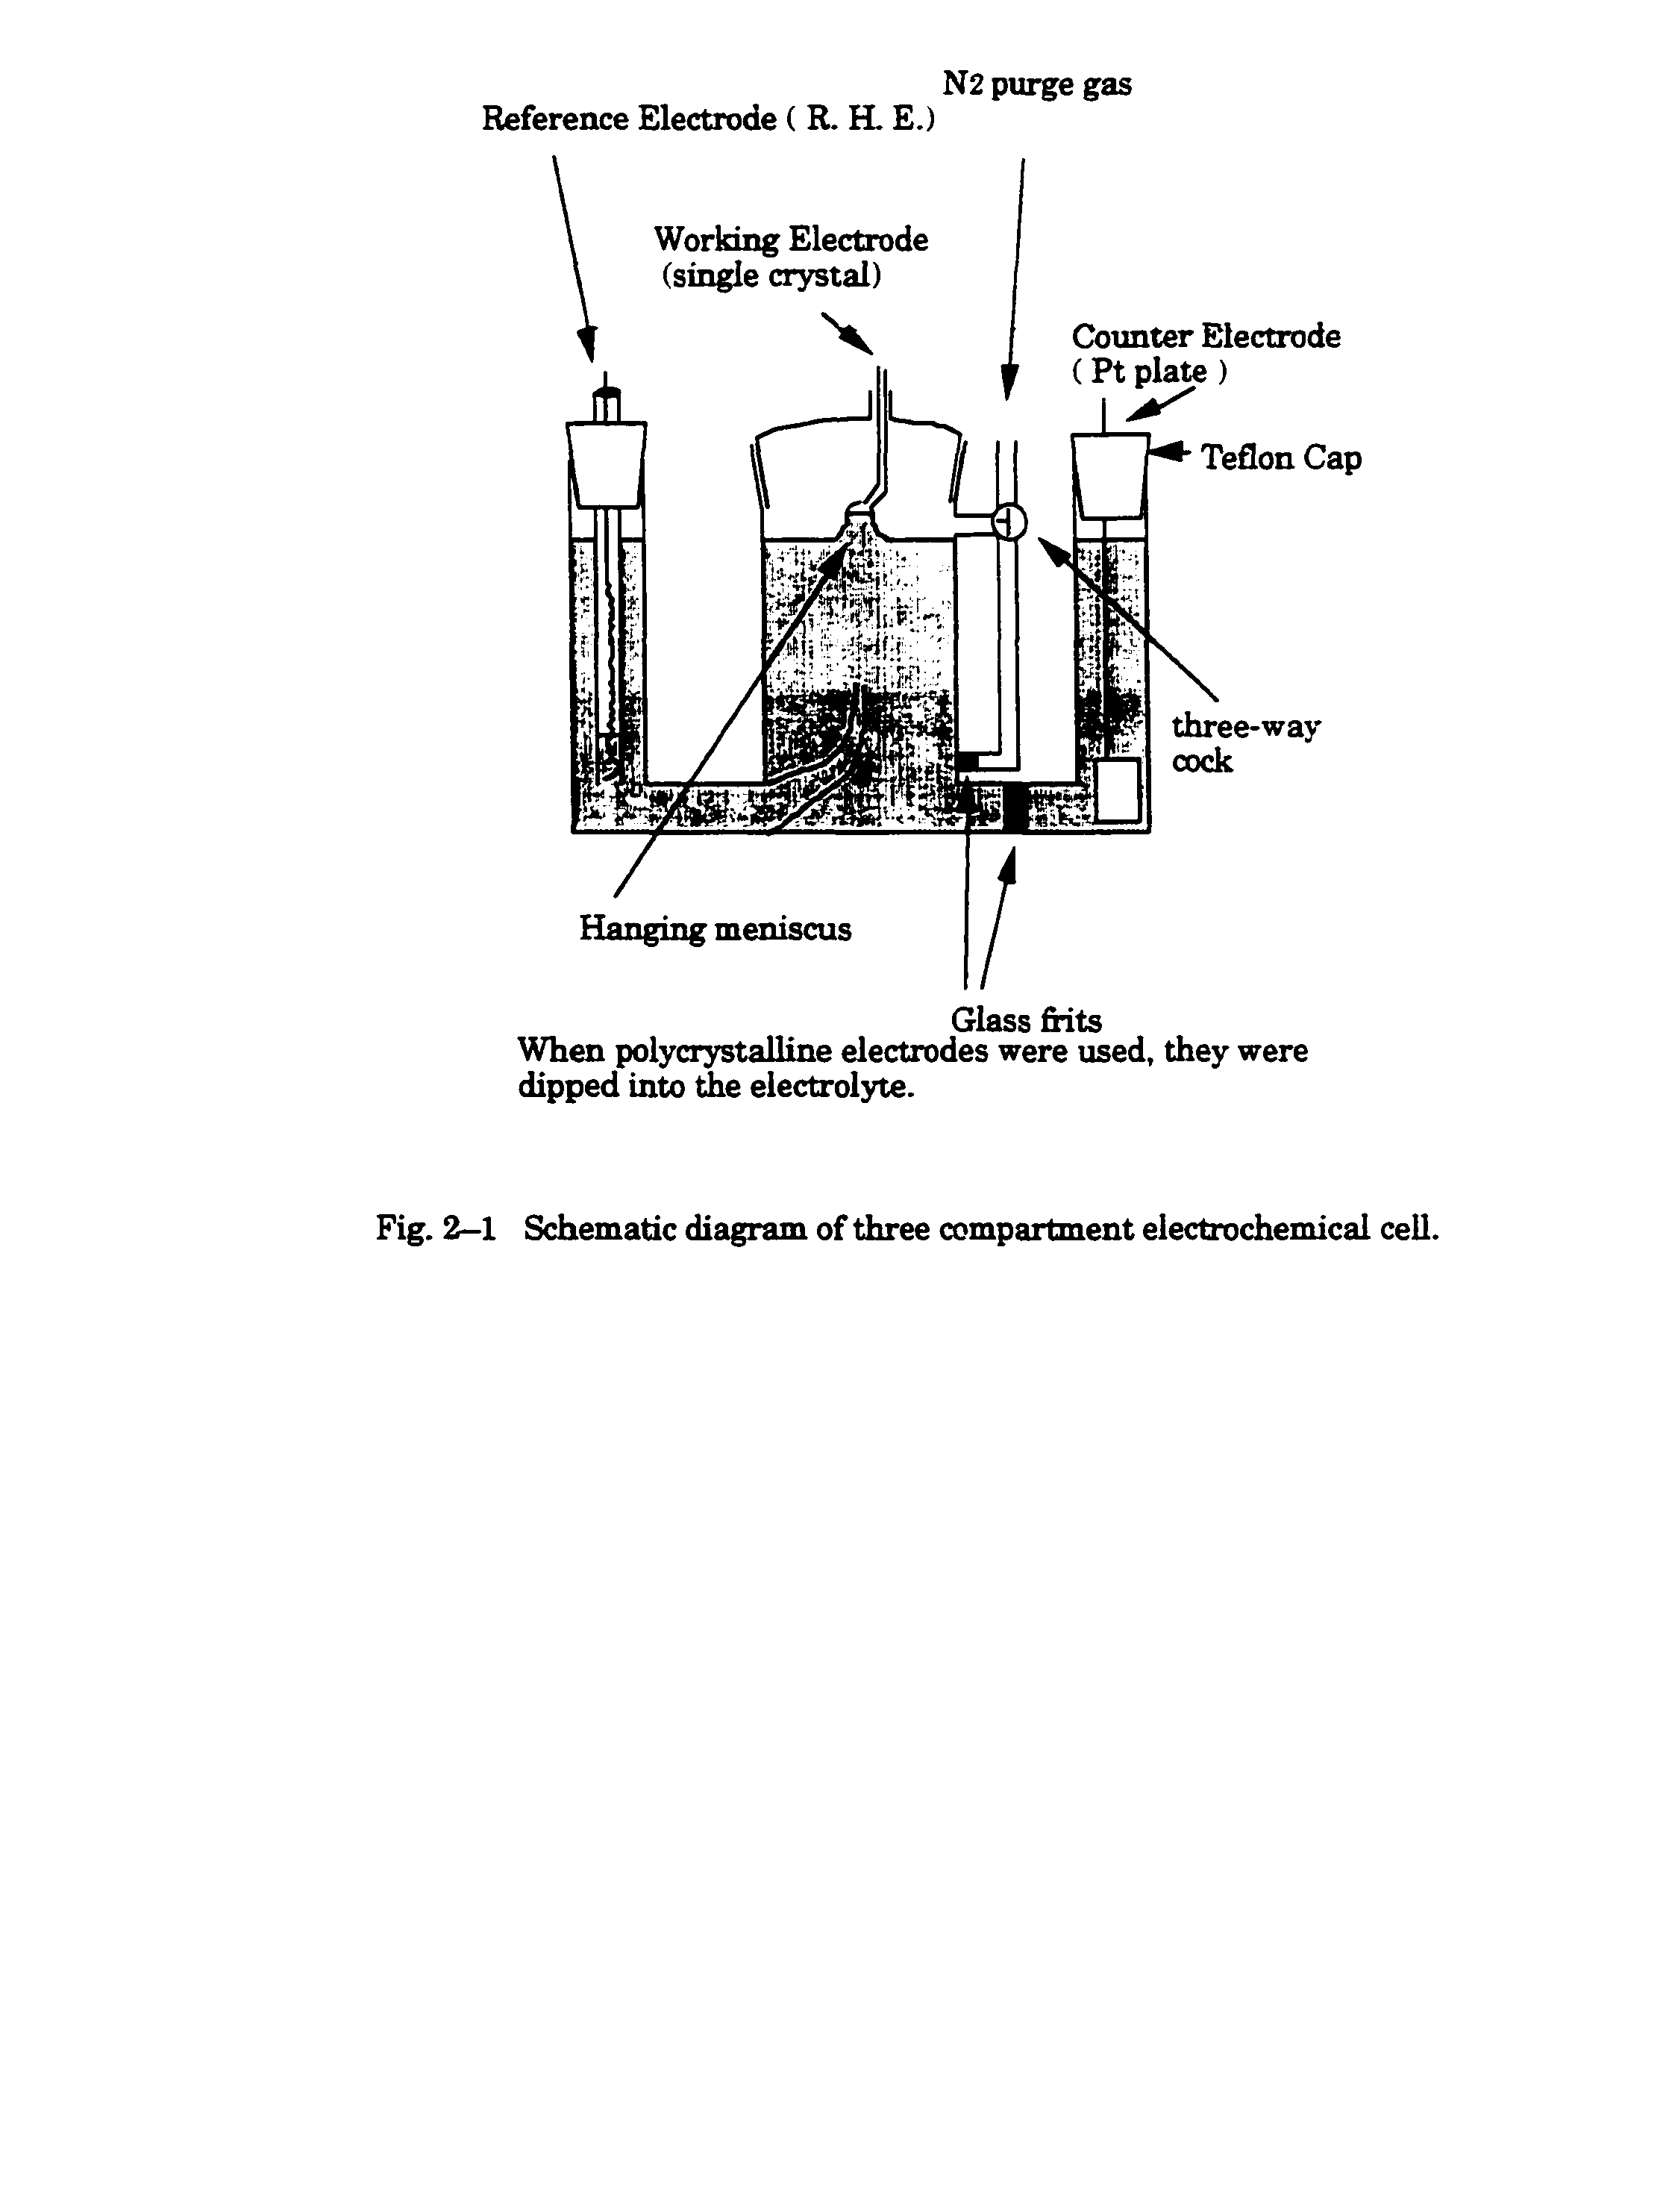 Fig. 2-1 Schematic diagram of three compartment electrochemical cell.